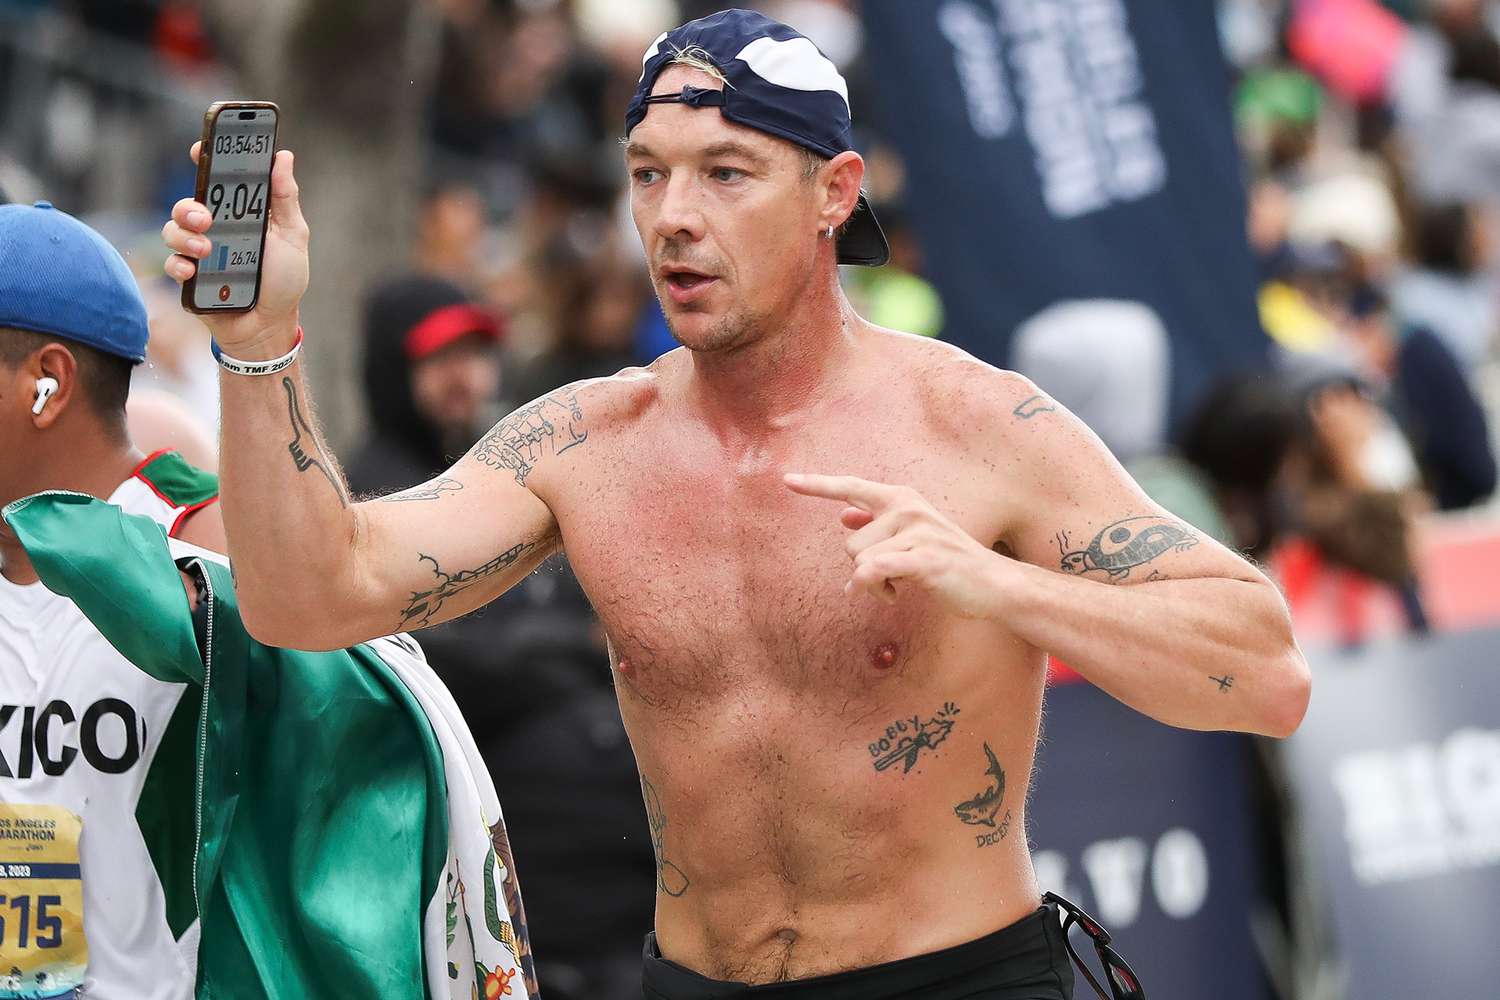 Diplo finishes the Los Angeles Marathon on March 19, 2023 in Los Angeles, California.